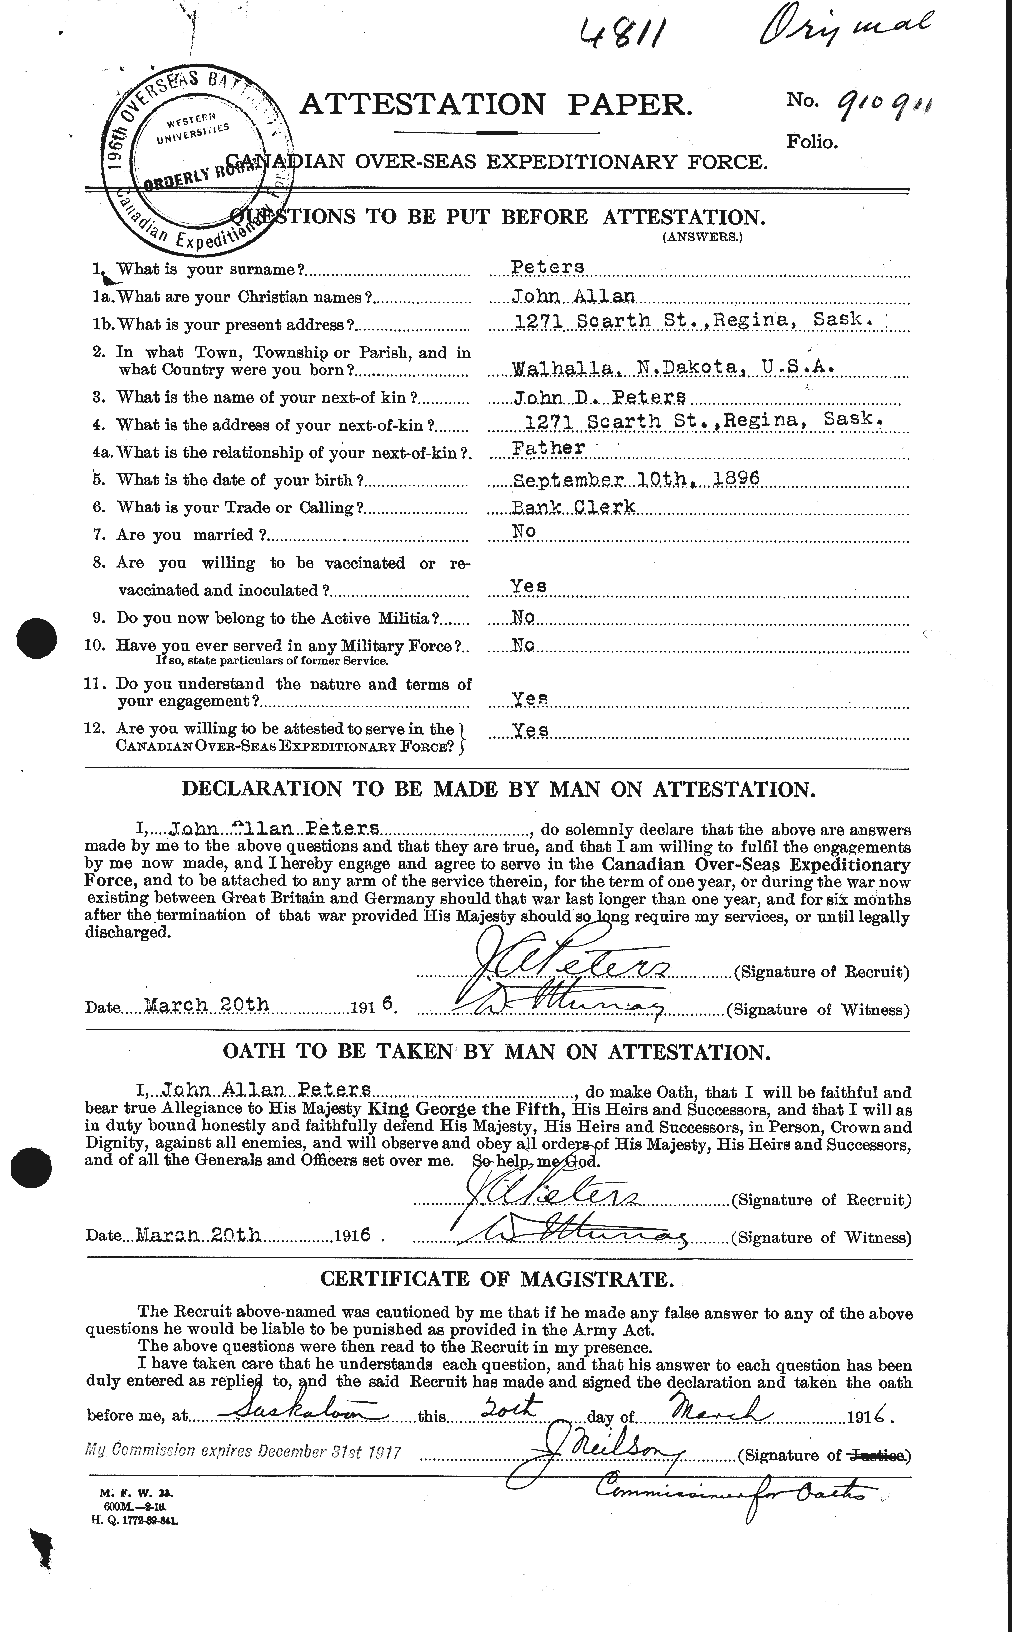 Personnel Records of the First World War - CEF 575544a